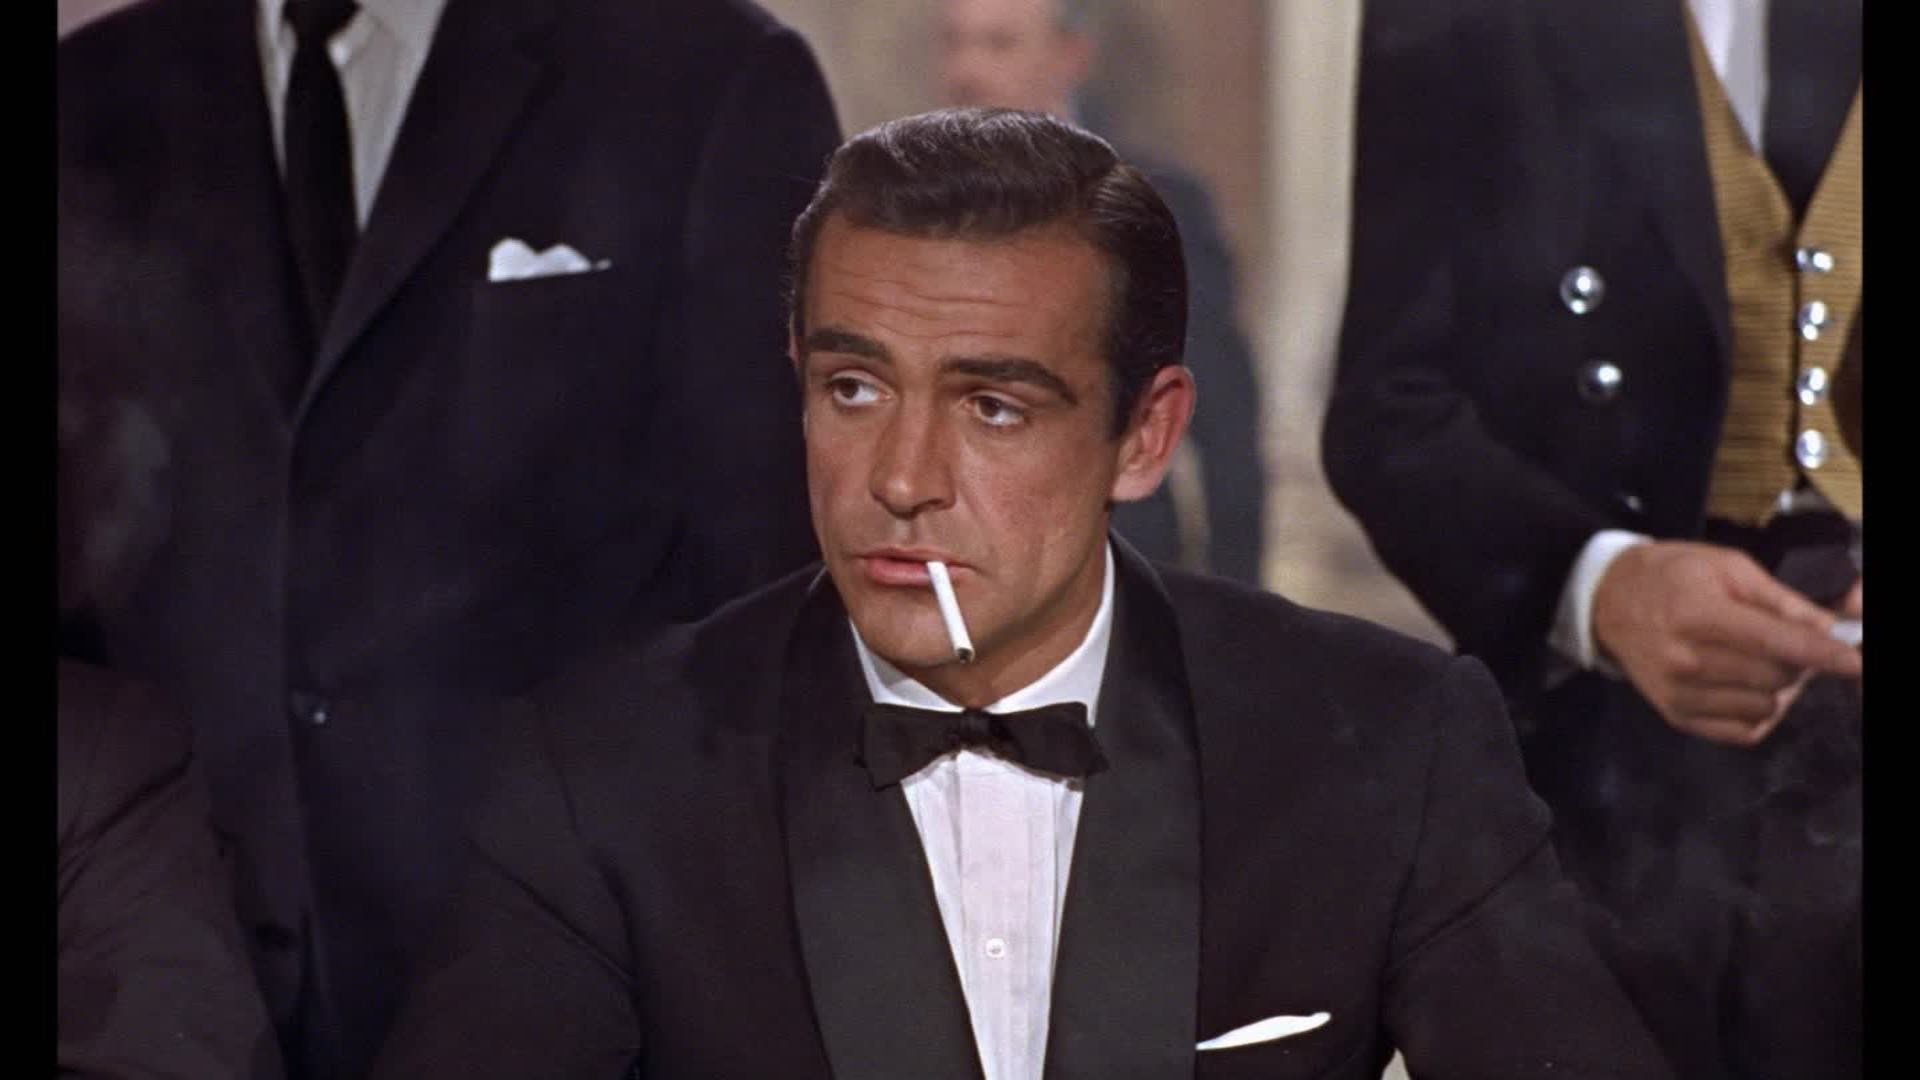 How Sean Connery captured the irresistible cool of James Bond - CNN Video